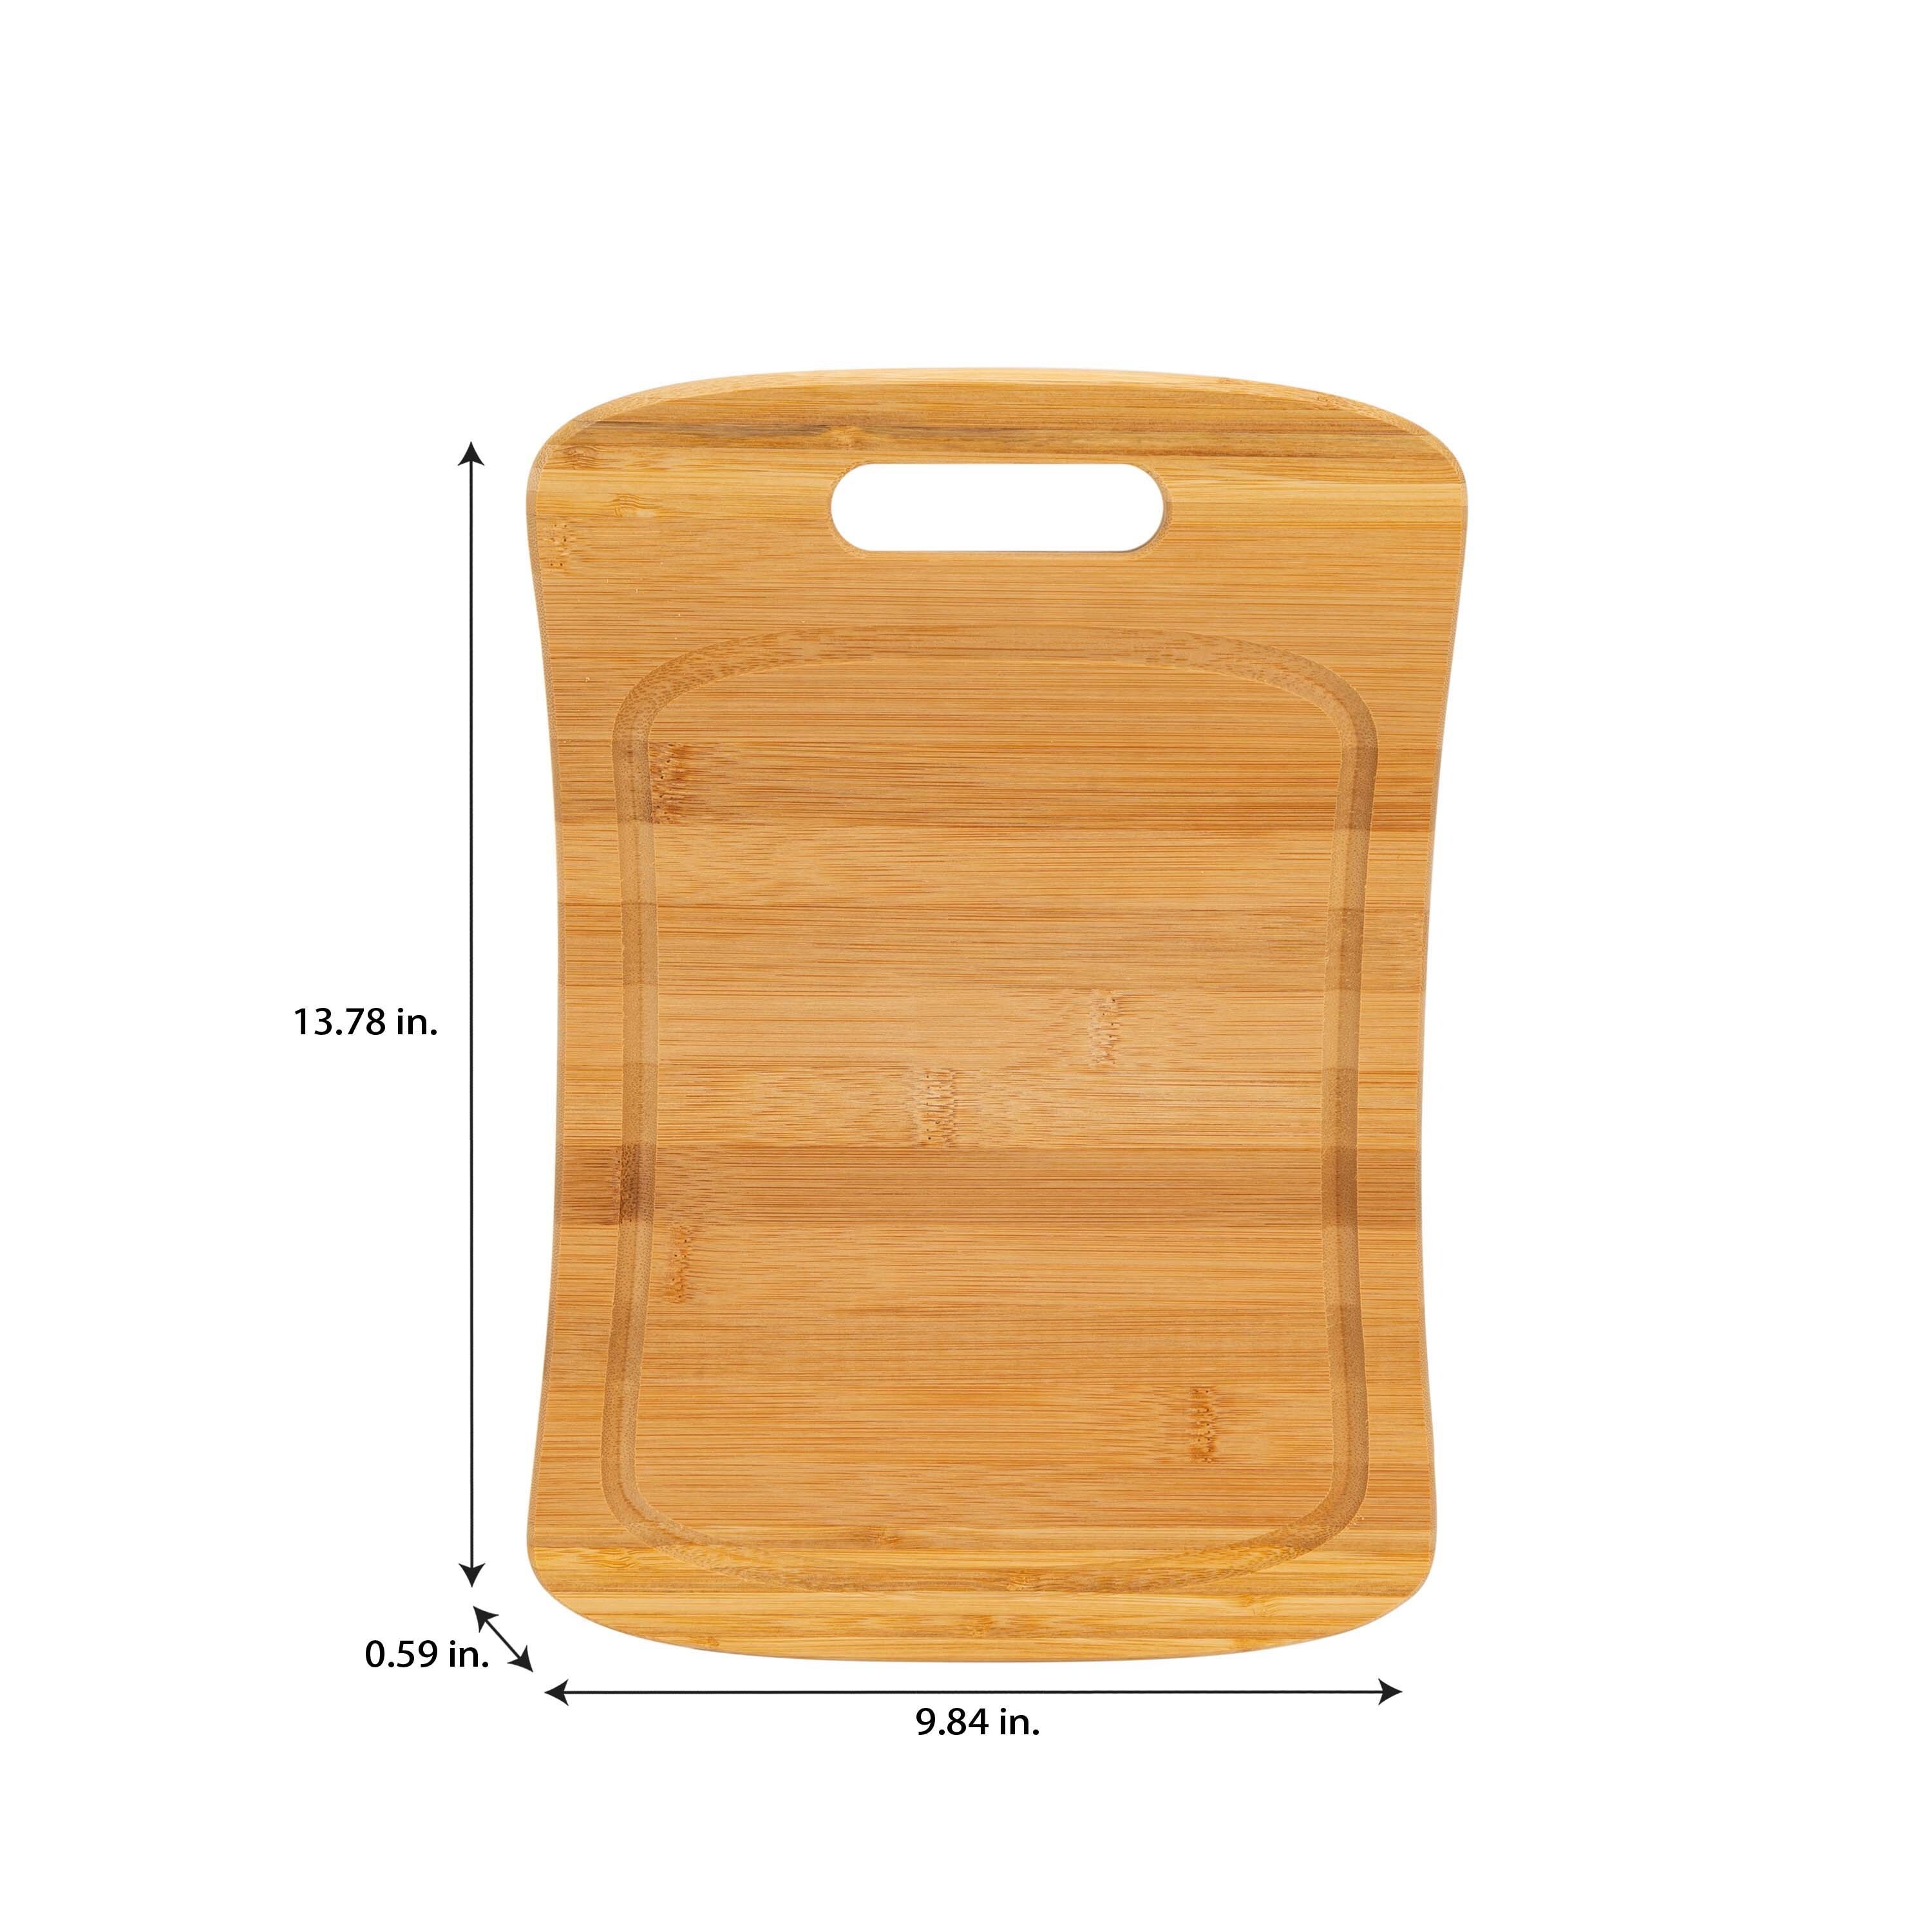 https://ak1.ostkcdn.com/images/products/is/images/direct/aa59933b298c170eaa3fb84183169e6ab40adff1/Kitchen-Details-Curved-Bamboo-Cutting-Board.jpg